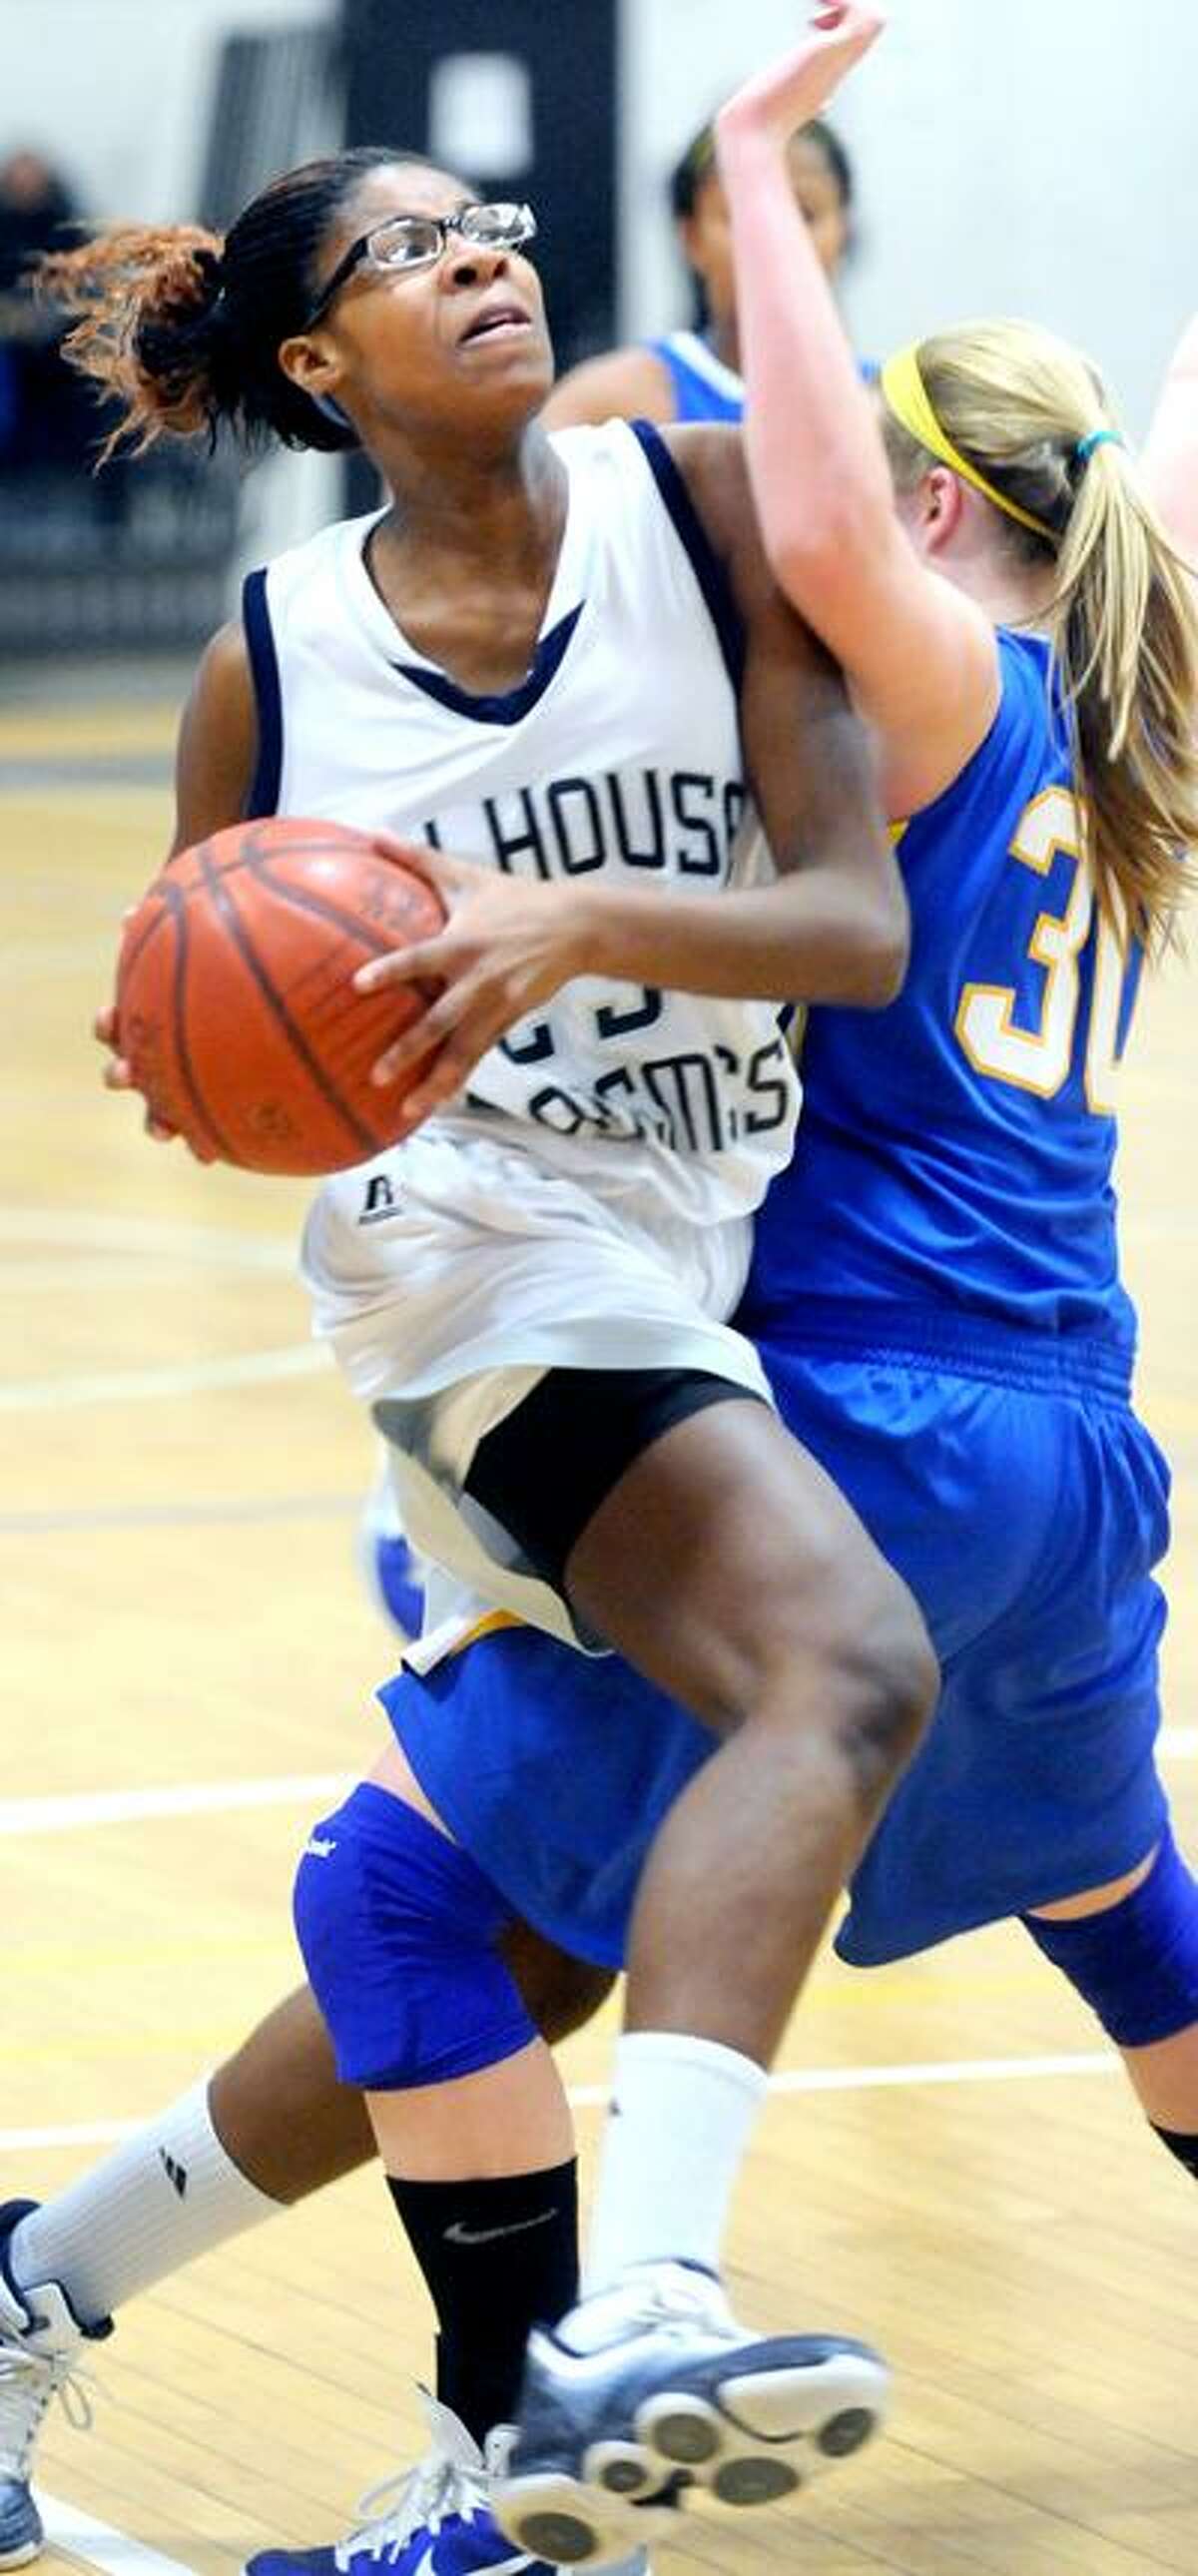 Bria Holmes (left) of Hillhouse drives through Cassie Santoro (right) of Mercy in the first half on 1/19/2011.Photo by Arnold Gold/New Haven Register AG0400B